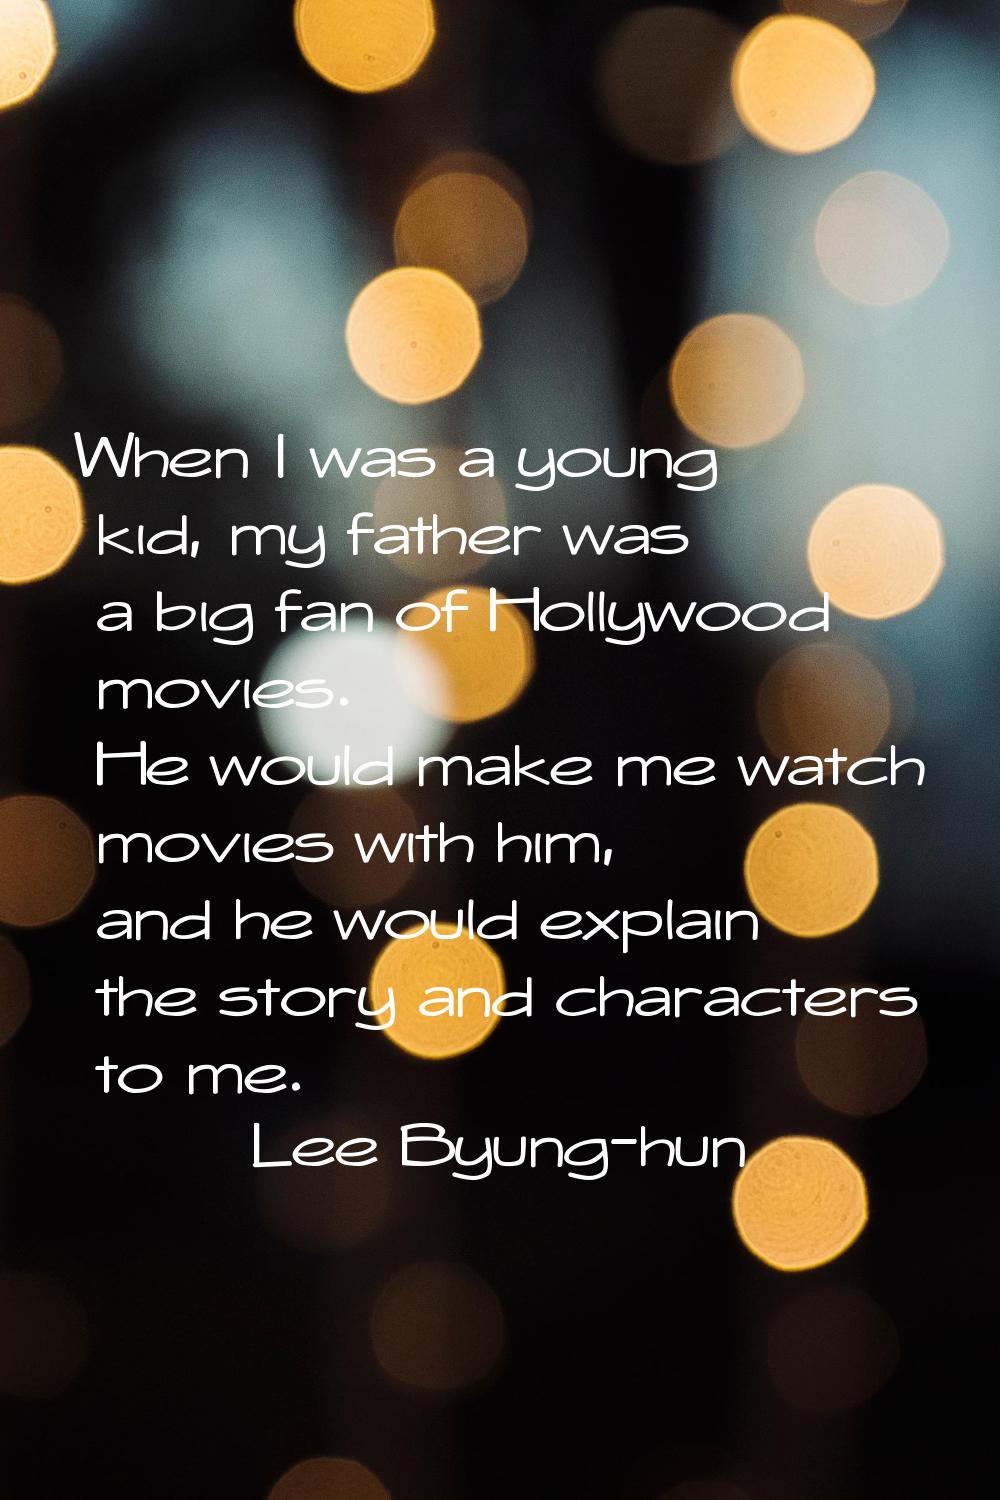 When I was a young kid, my father was a big fan of Hollywood movies. He would make me watch movies 